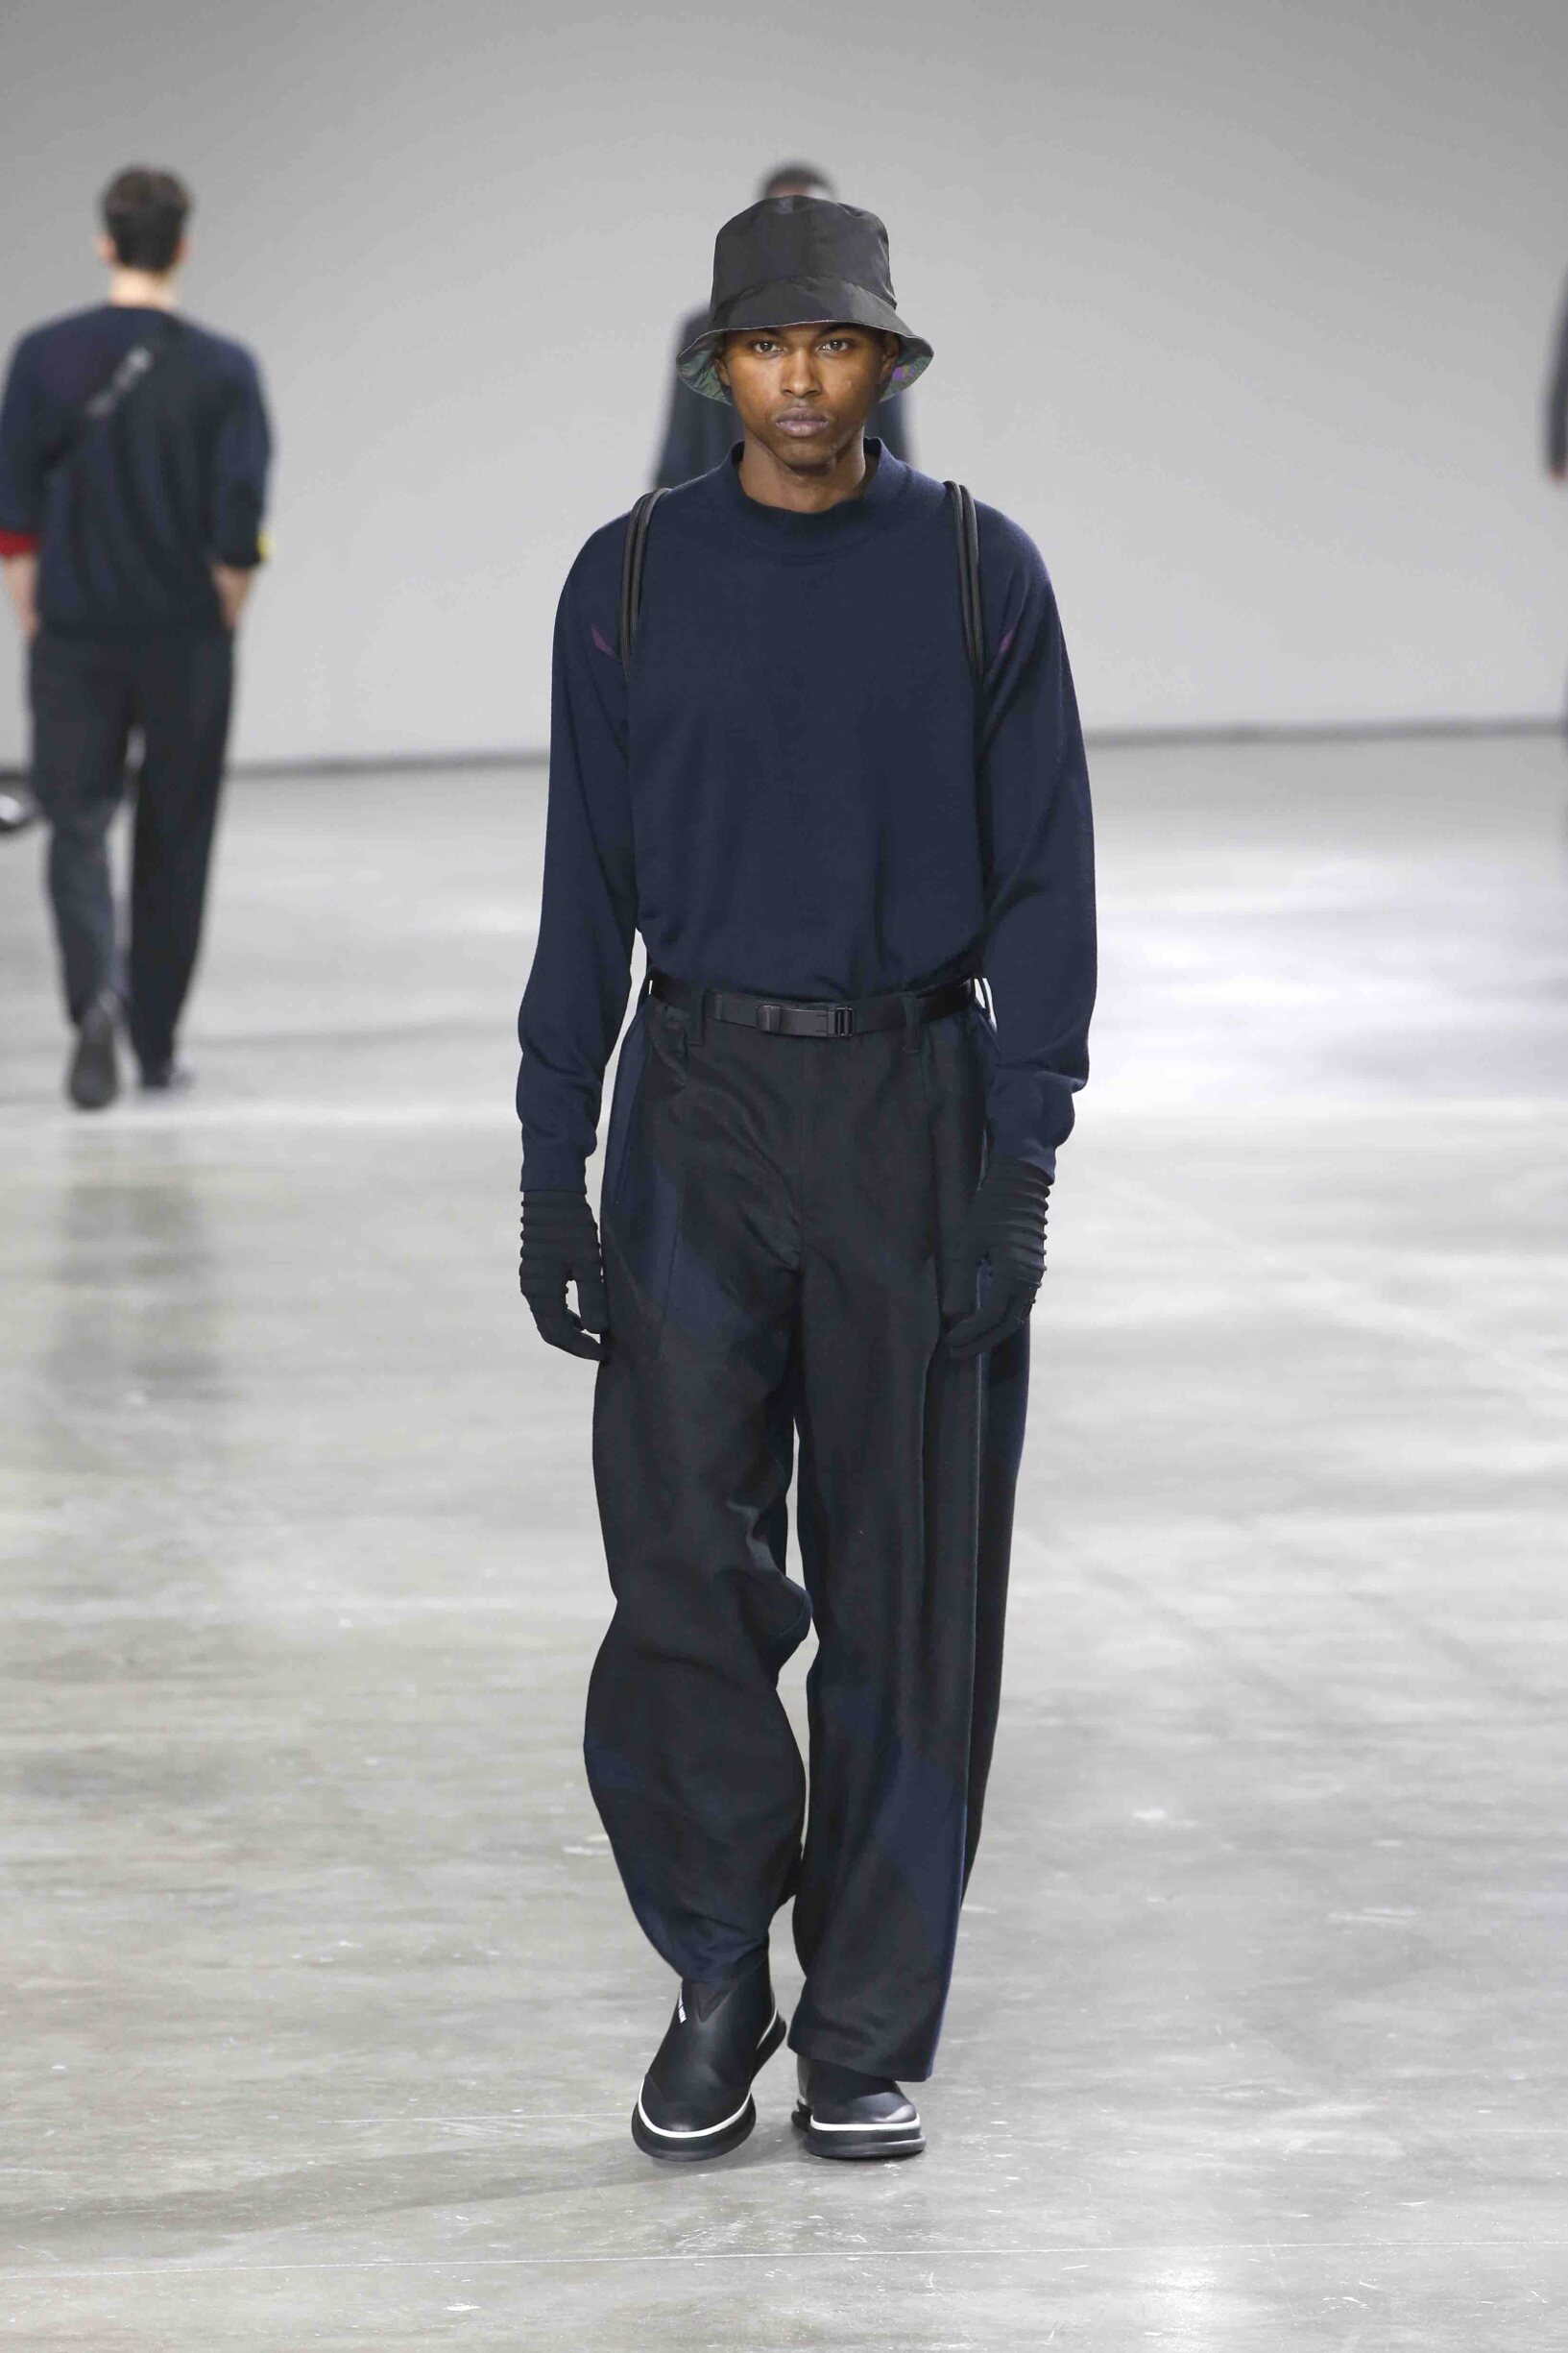 ISSEY MIYAKE FALL WINTER 2019 MEN’S COLLECTION | The Skinny Beep